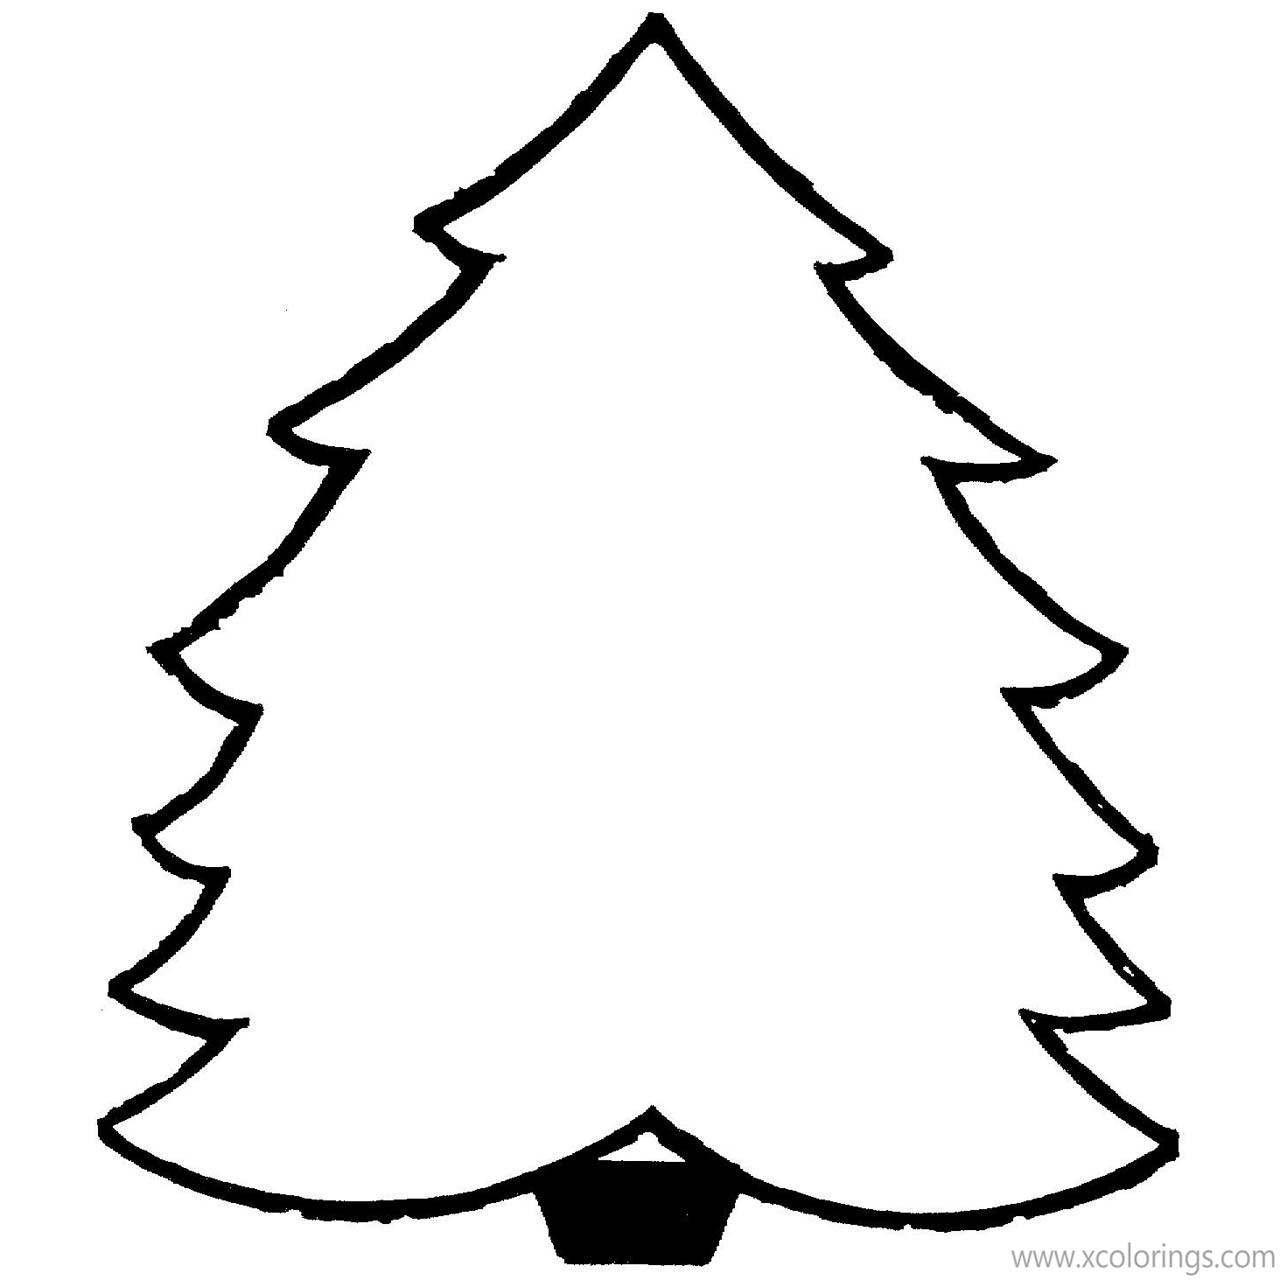 Free Blank Christmas Tree Coloring Pages printable